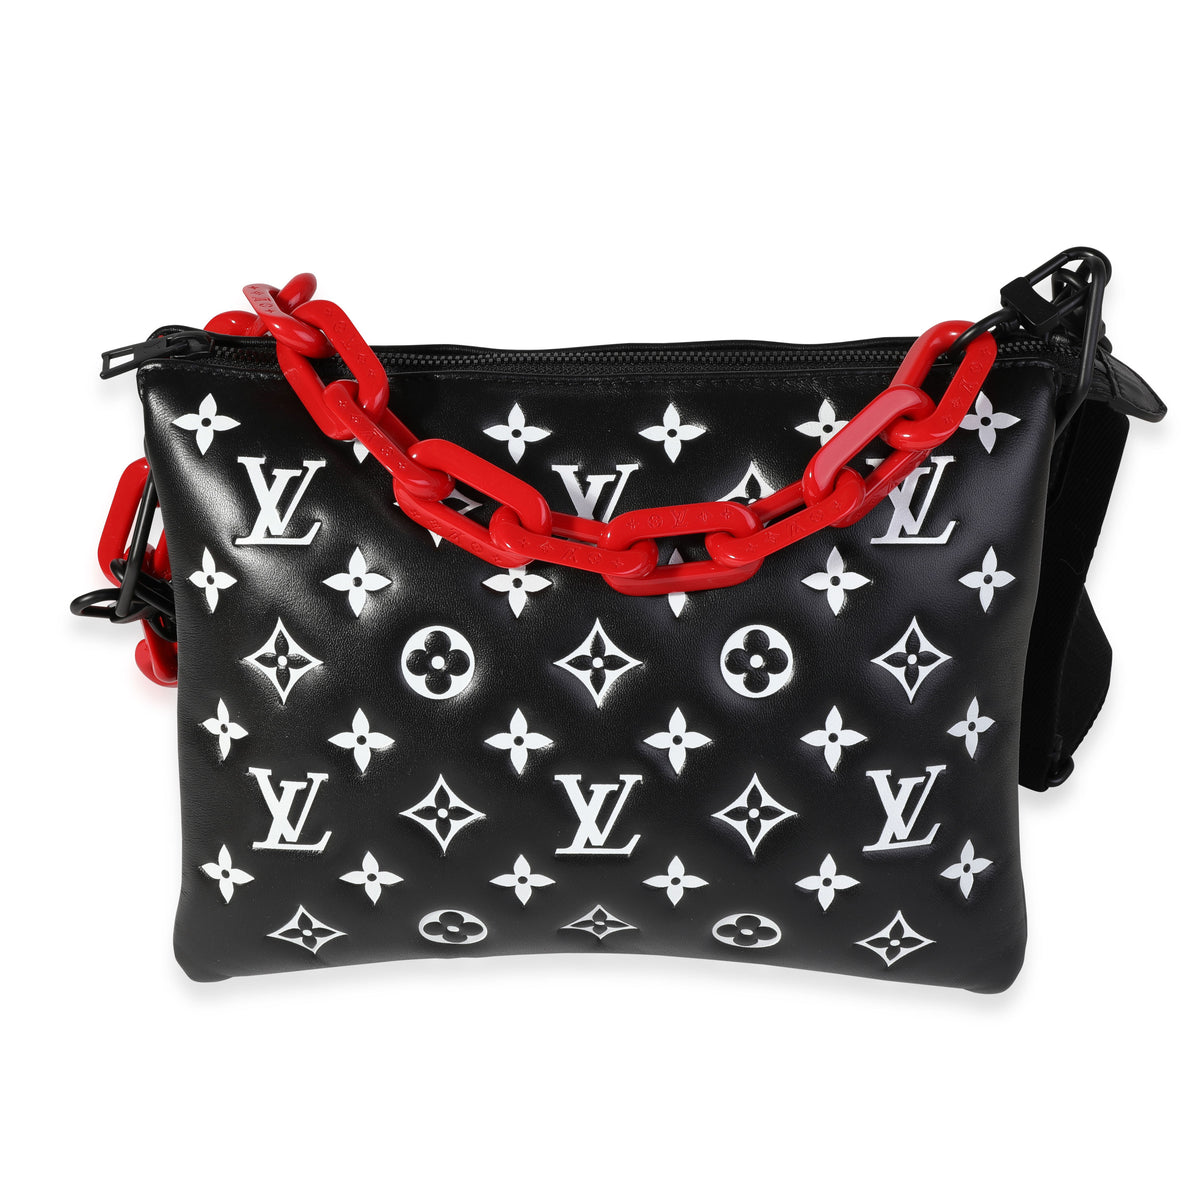 Louis Vuitton Coussin PM Black/White in Lambskin Leather with